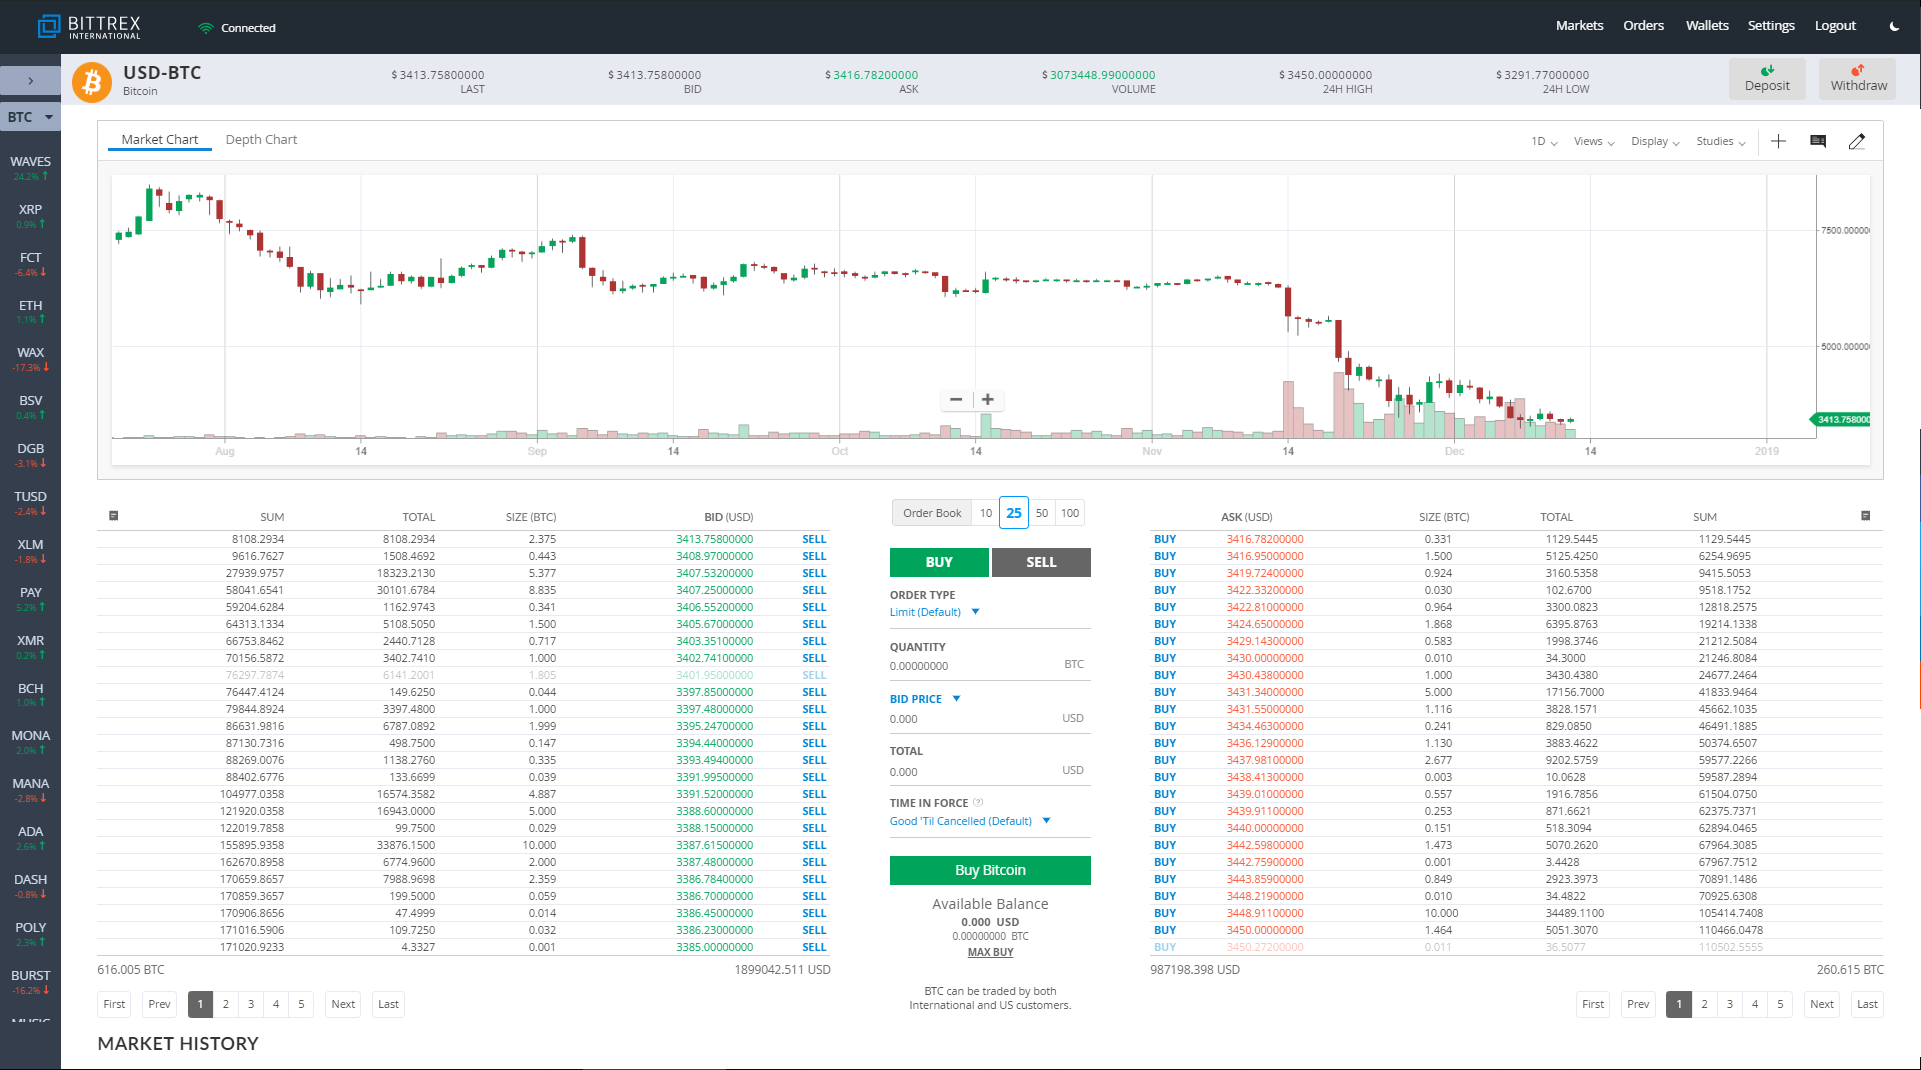 A snapshot of Bittrex’s trading charts 